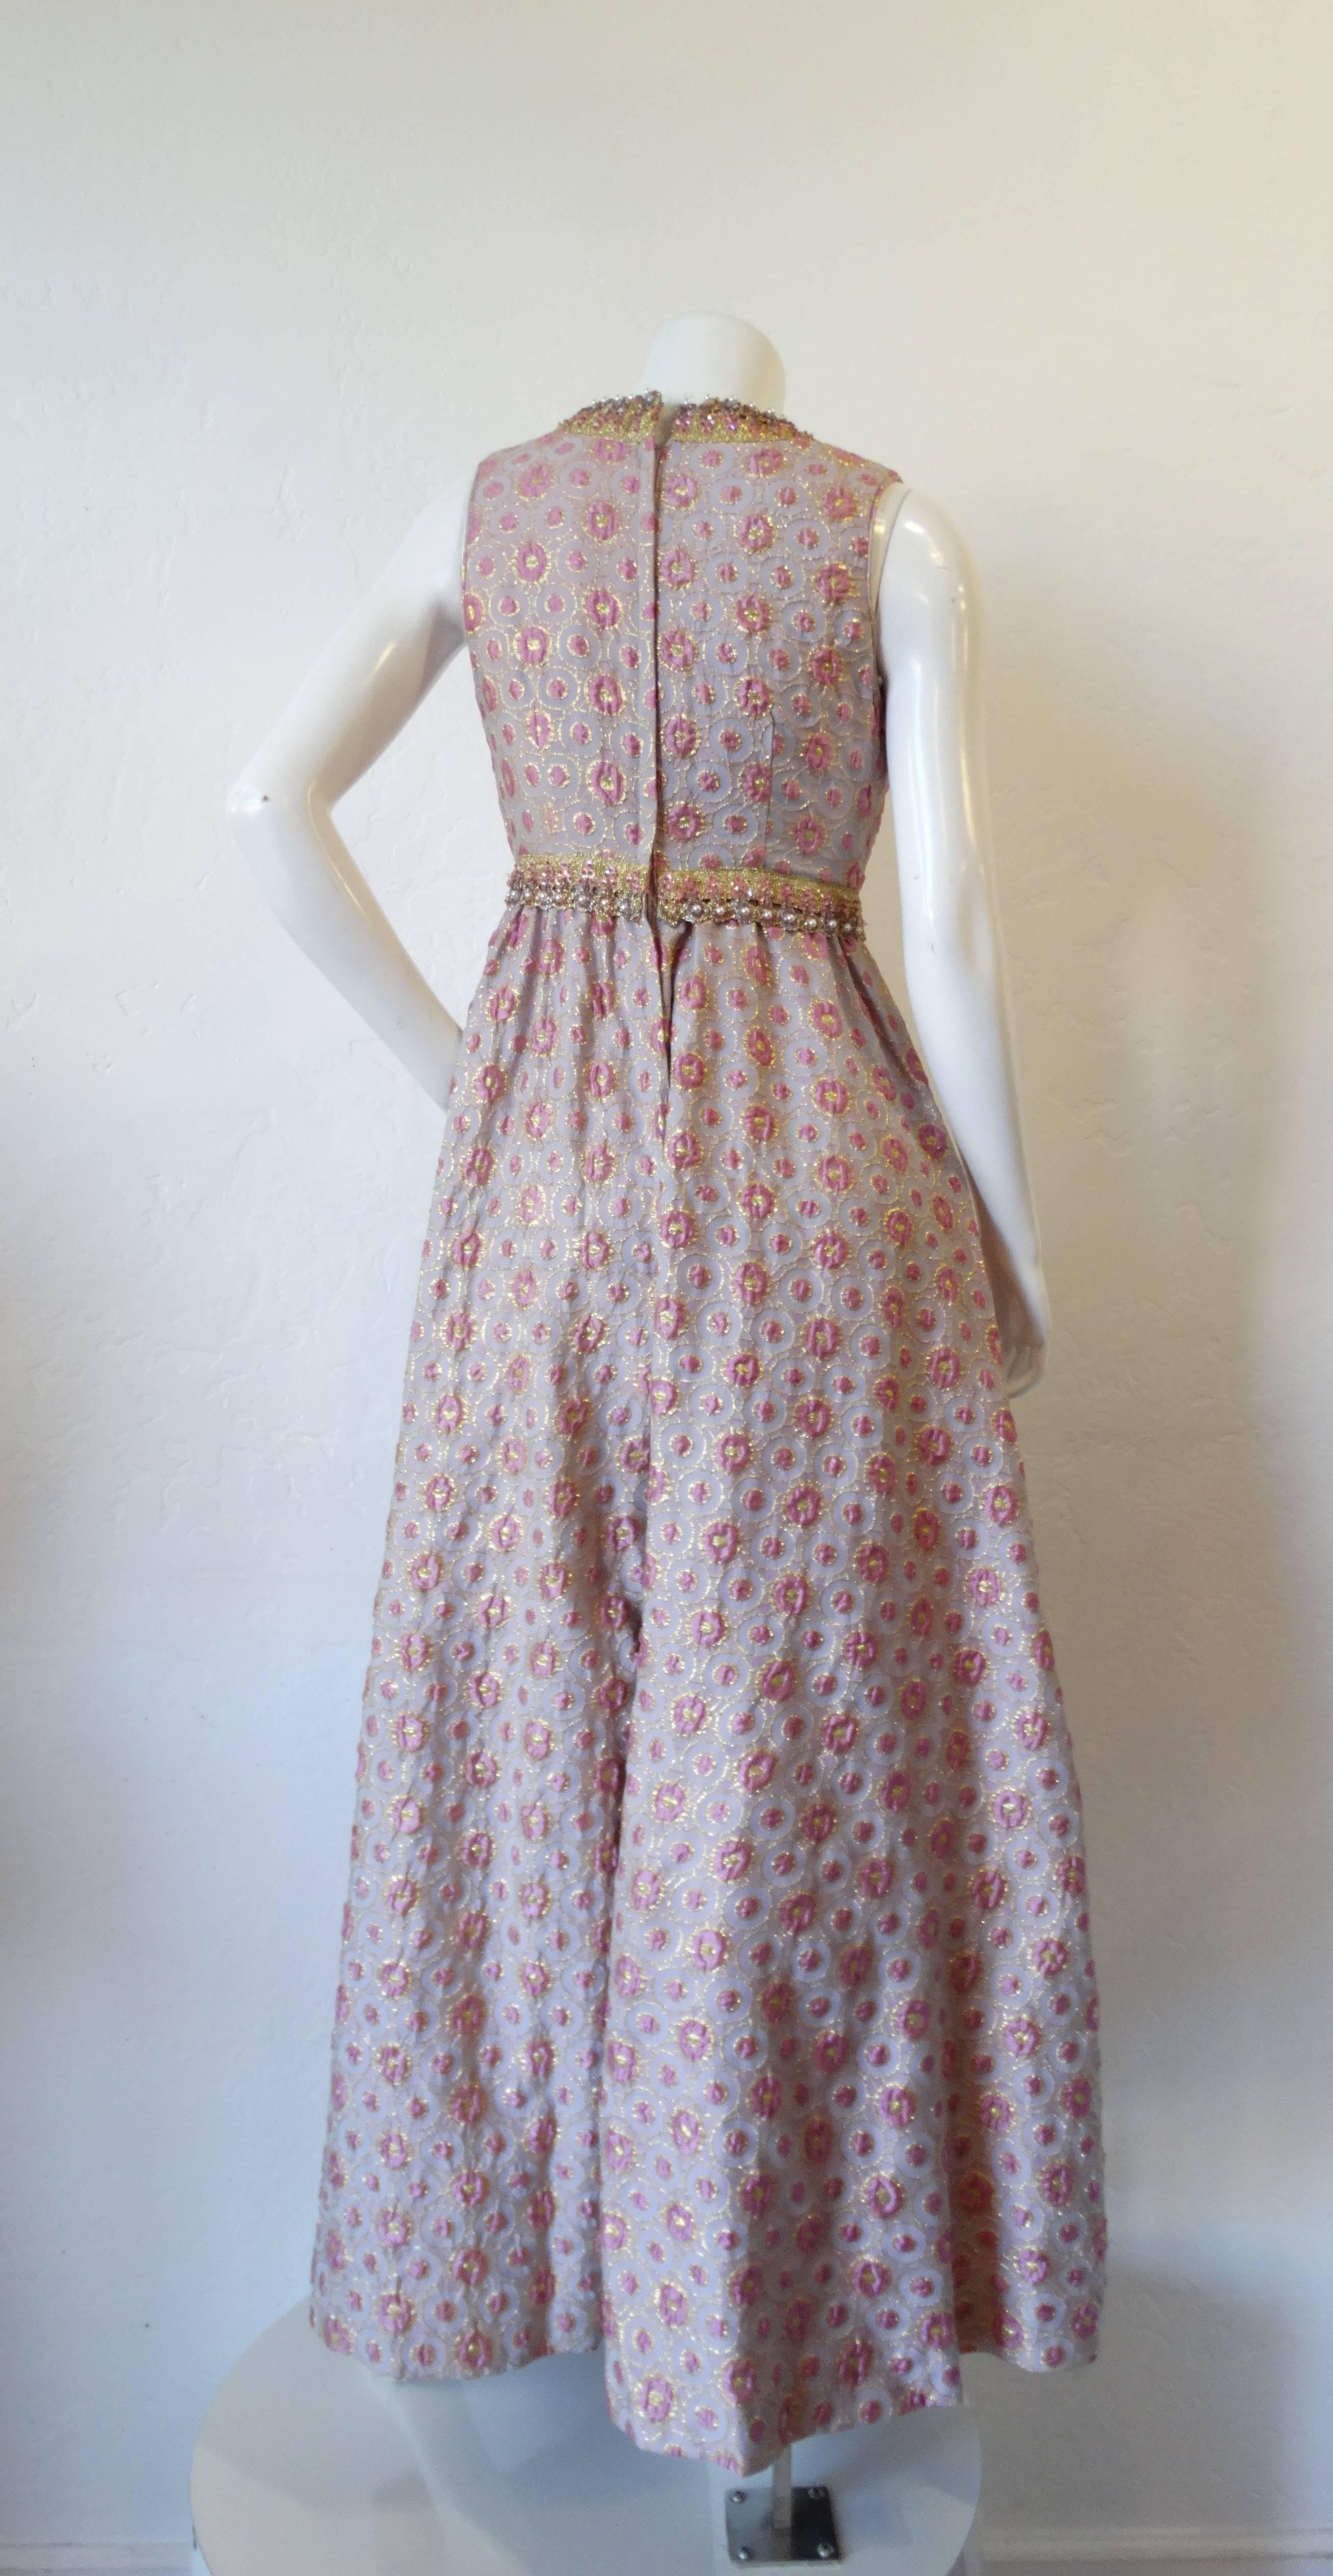 The most elegant jumpsuit from the 1960s- designed by Sadie for I.Magnin. Sleevless fit with a v neckline. Unique pink and gold woven print accented with gold trim, faux pearl beads and sequins in matching hues of pink and lilac. Huge wide leg hem.